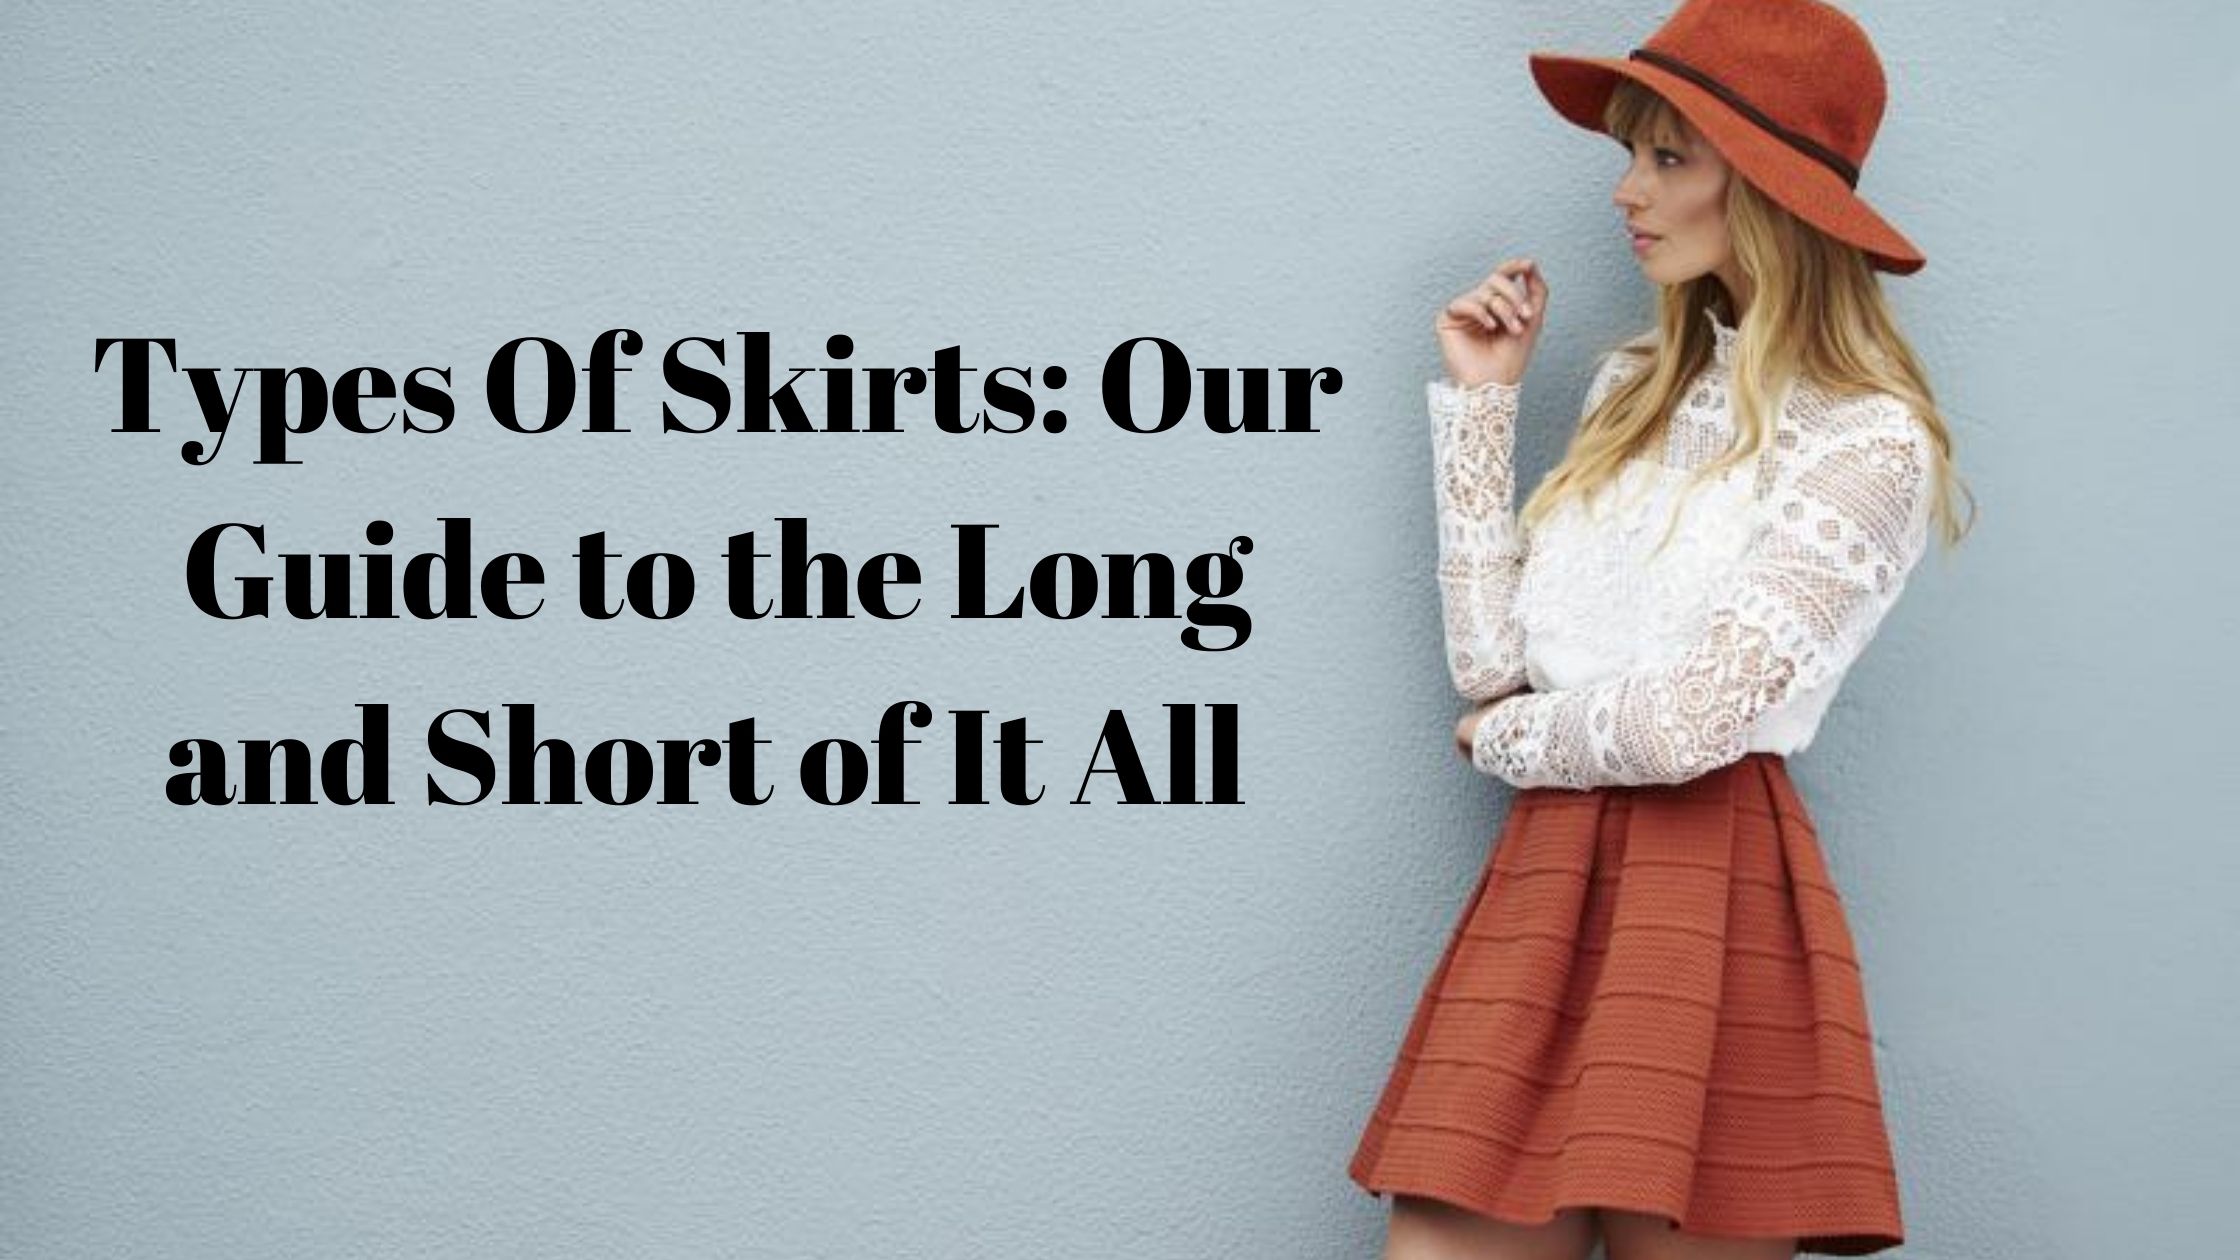 You are currently viewing Types Of Skirts: Our Guide to the Long and Short of It All